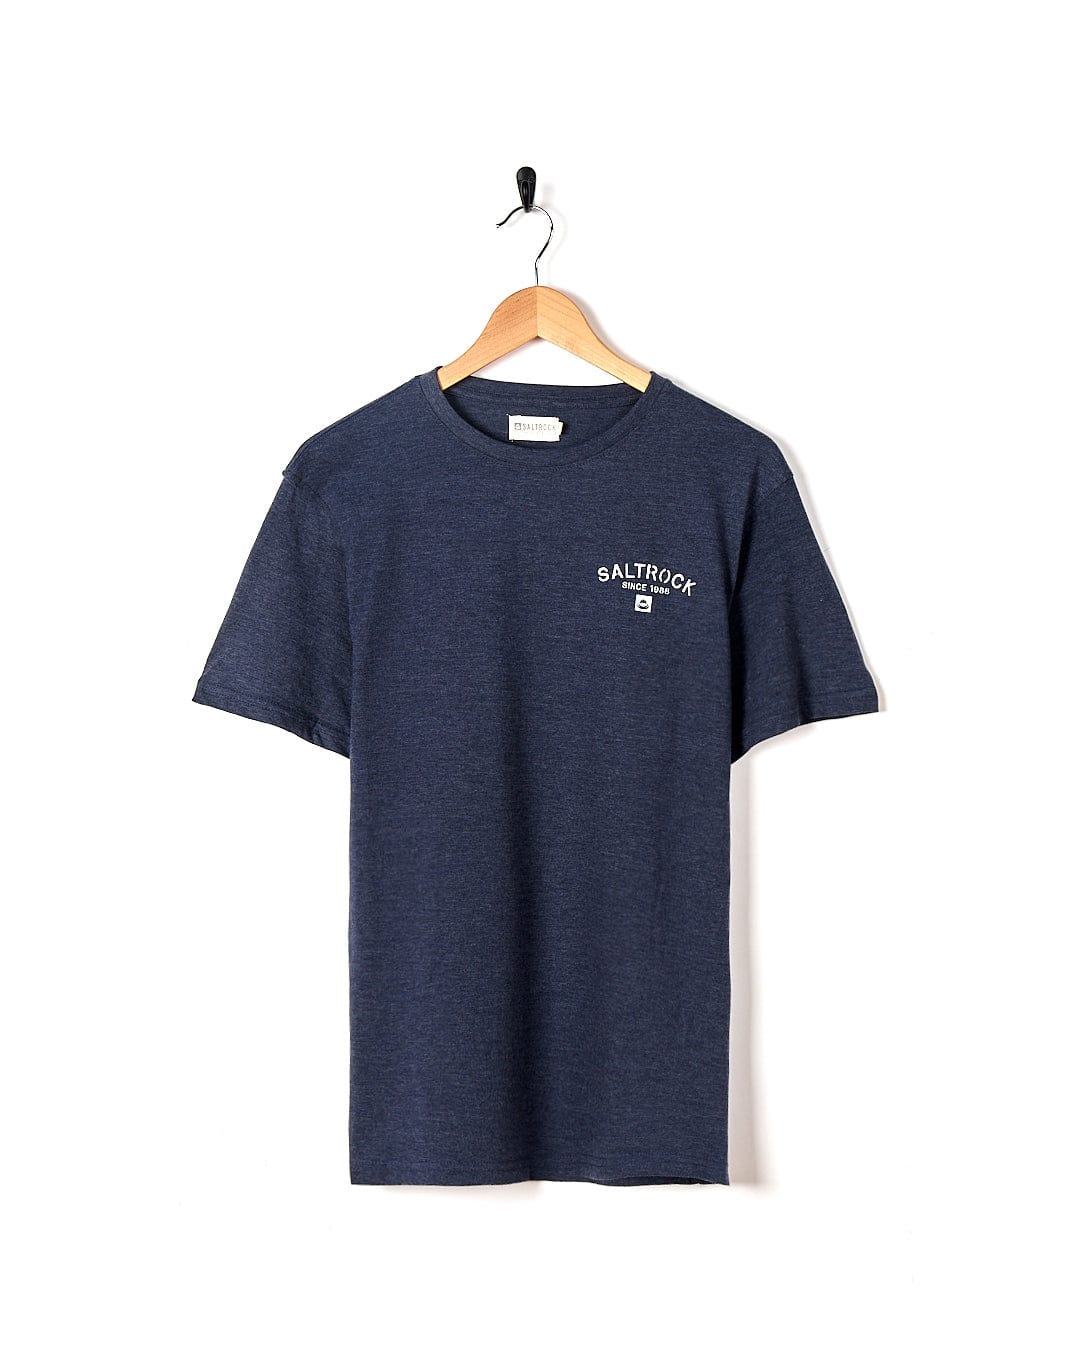 A Saltrock Stencil - Mens Location T-Shirt - Poole - Dress Blue with a white logo on it.